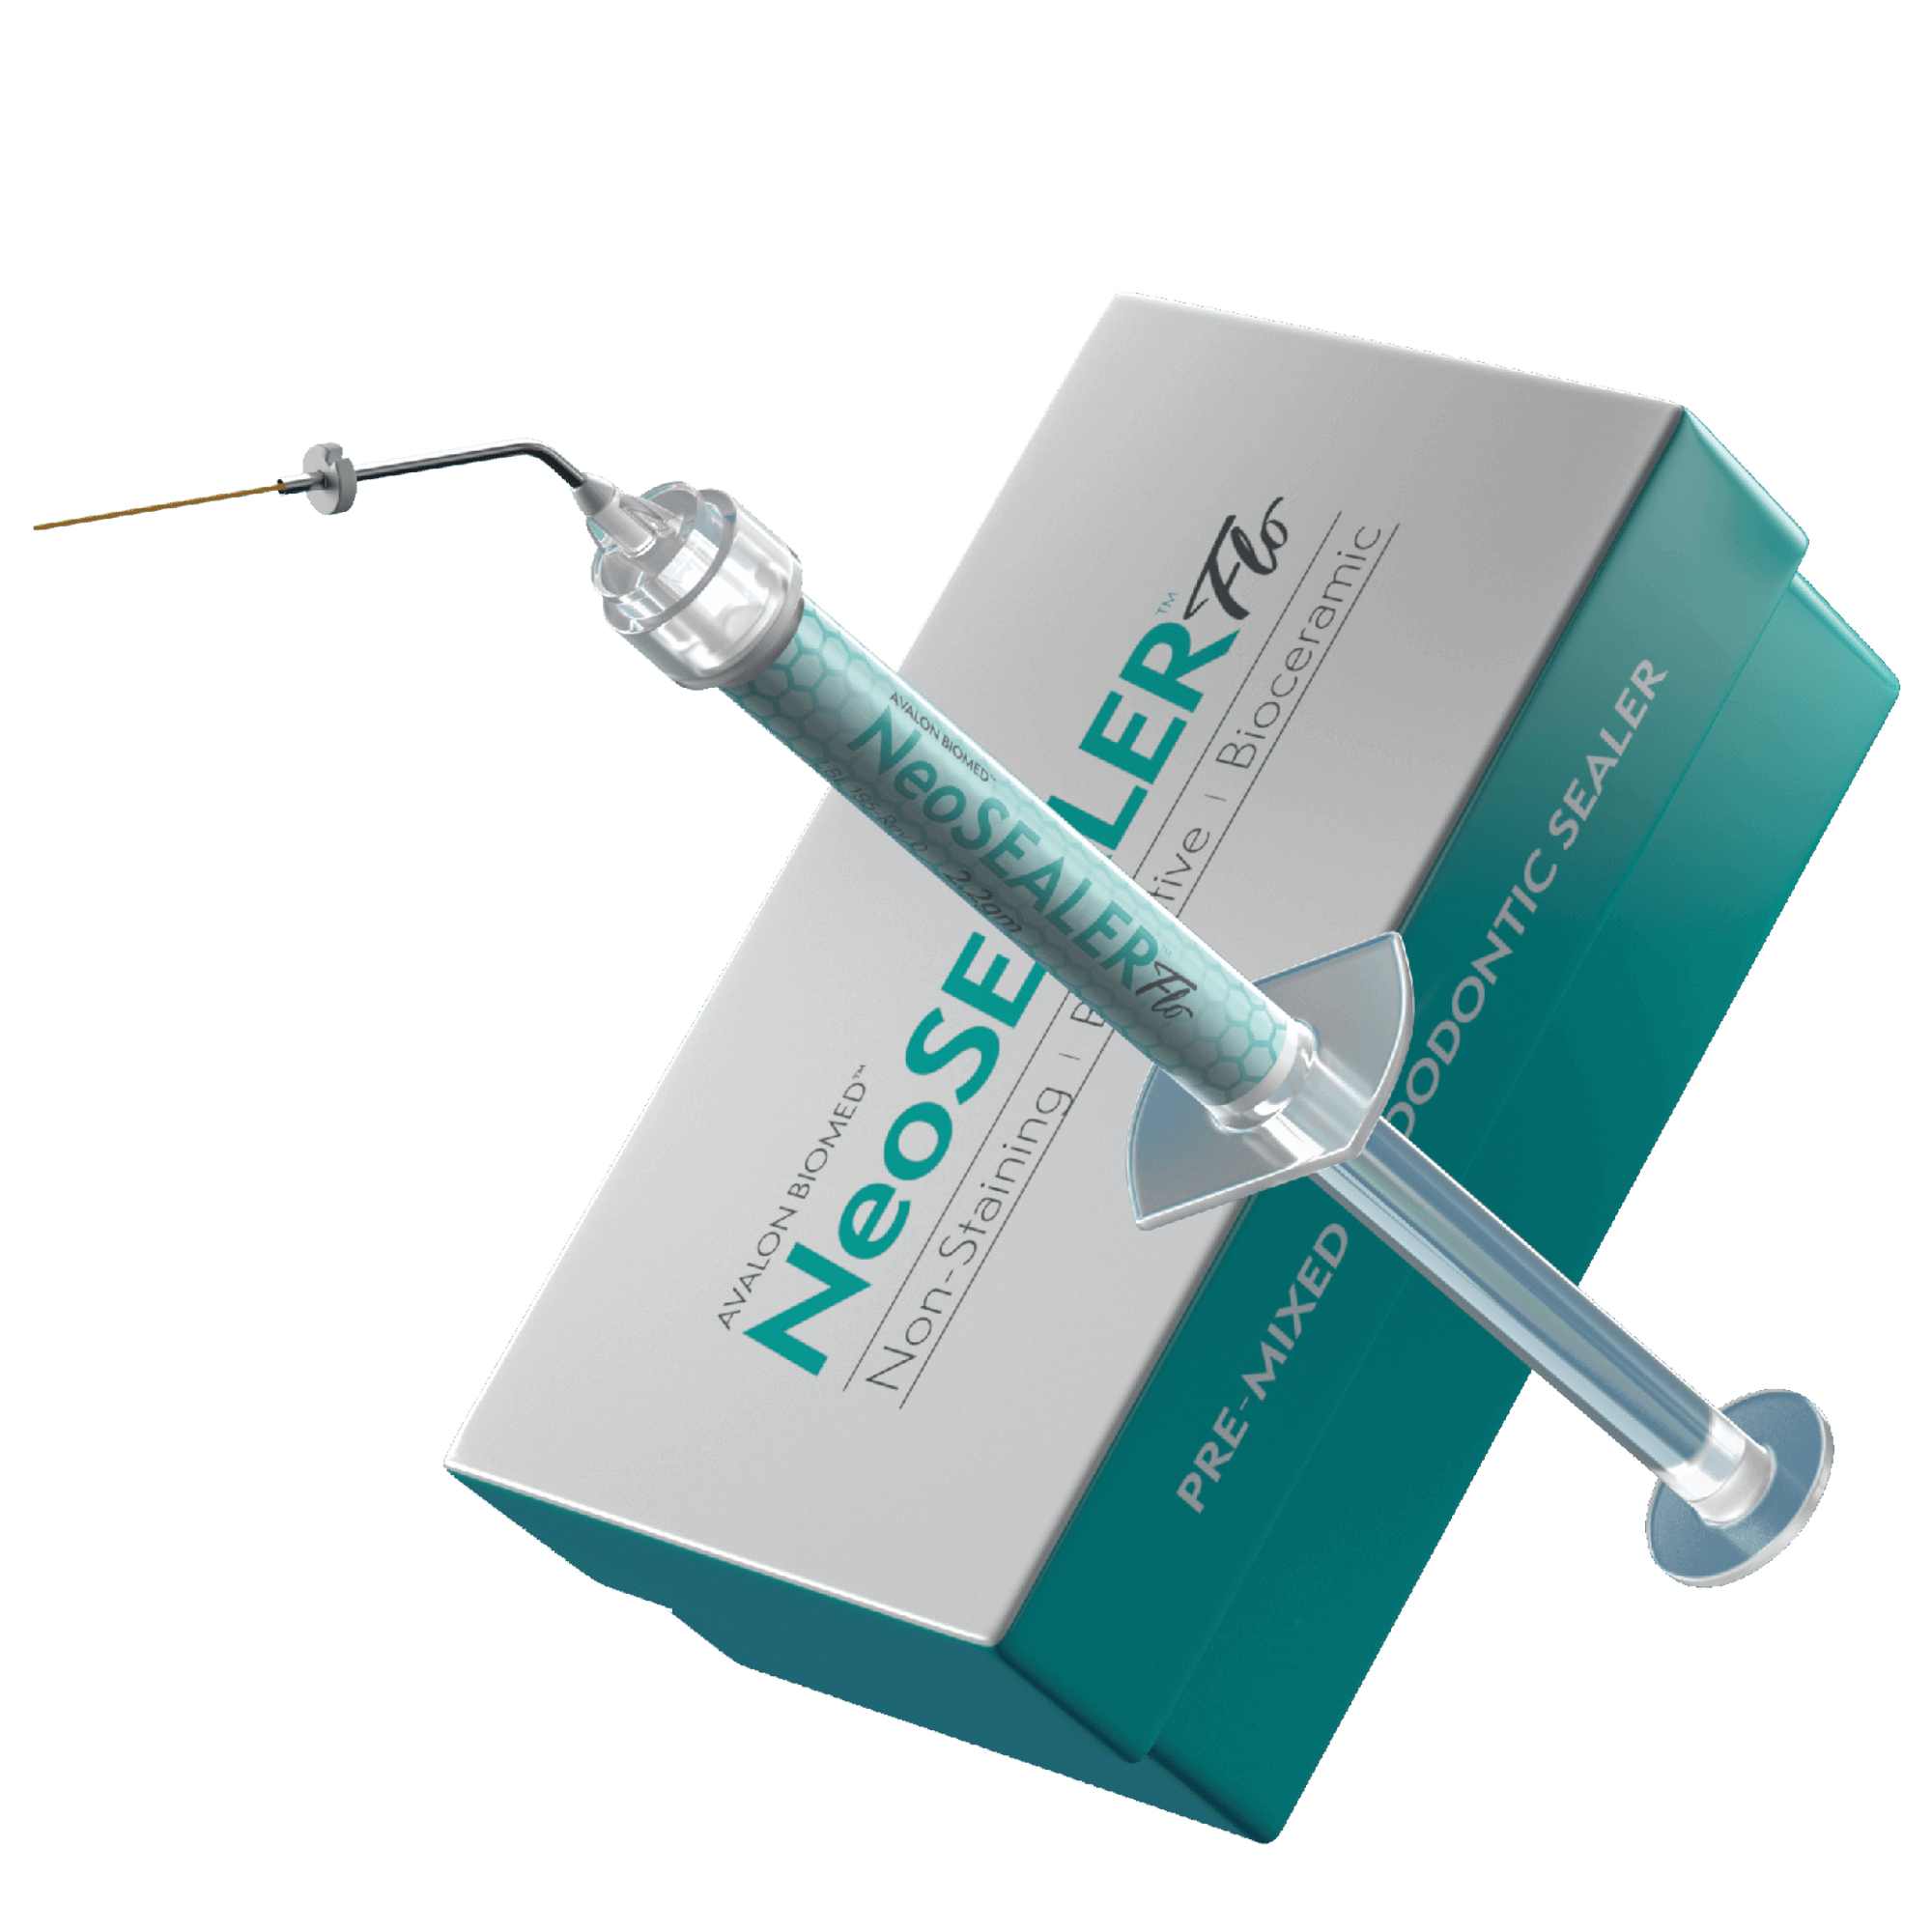 NeoSEALER Flo NeoSEALER® Flo is a bioactive bioceramic root canal sealer with superior handling properties, promoting hydroxyapatite formation to support the healing process. NeoSEALER Flo is biocompatible, antimicrobial, dimensionally stable, and RESIN-F